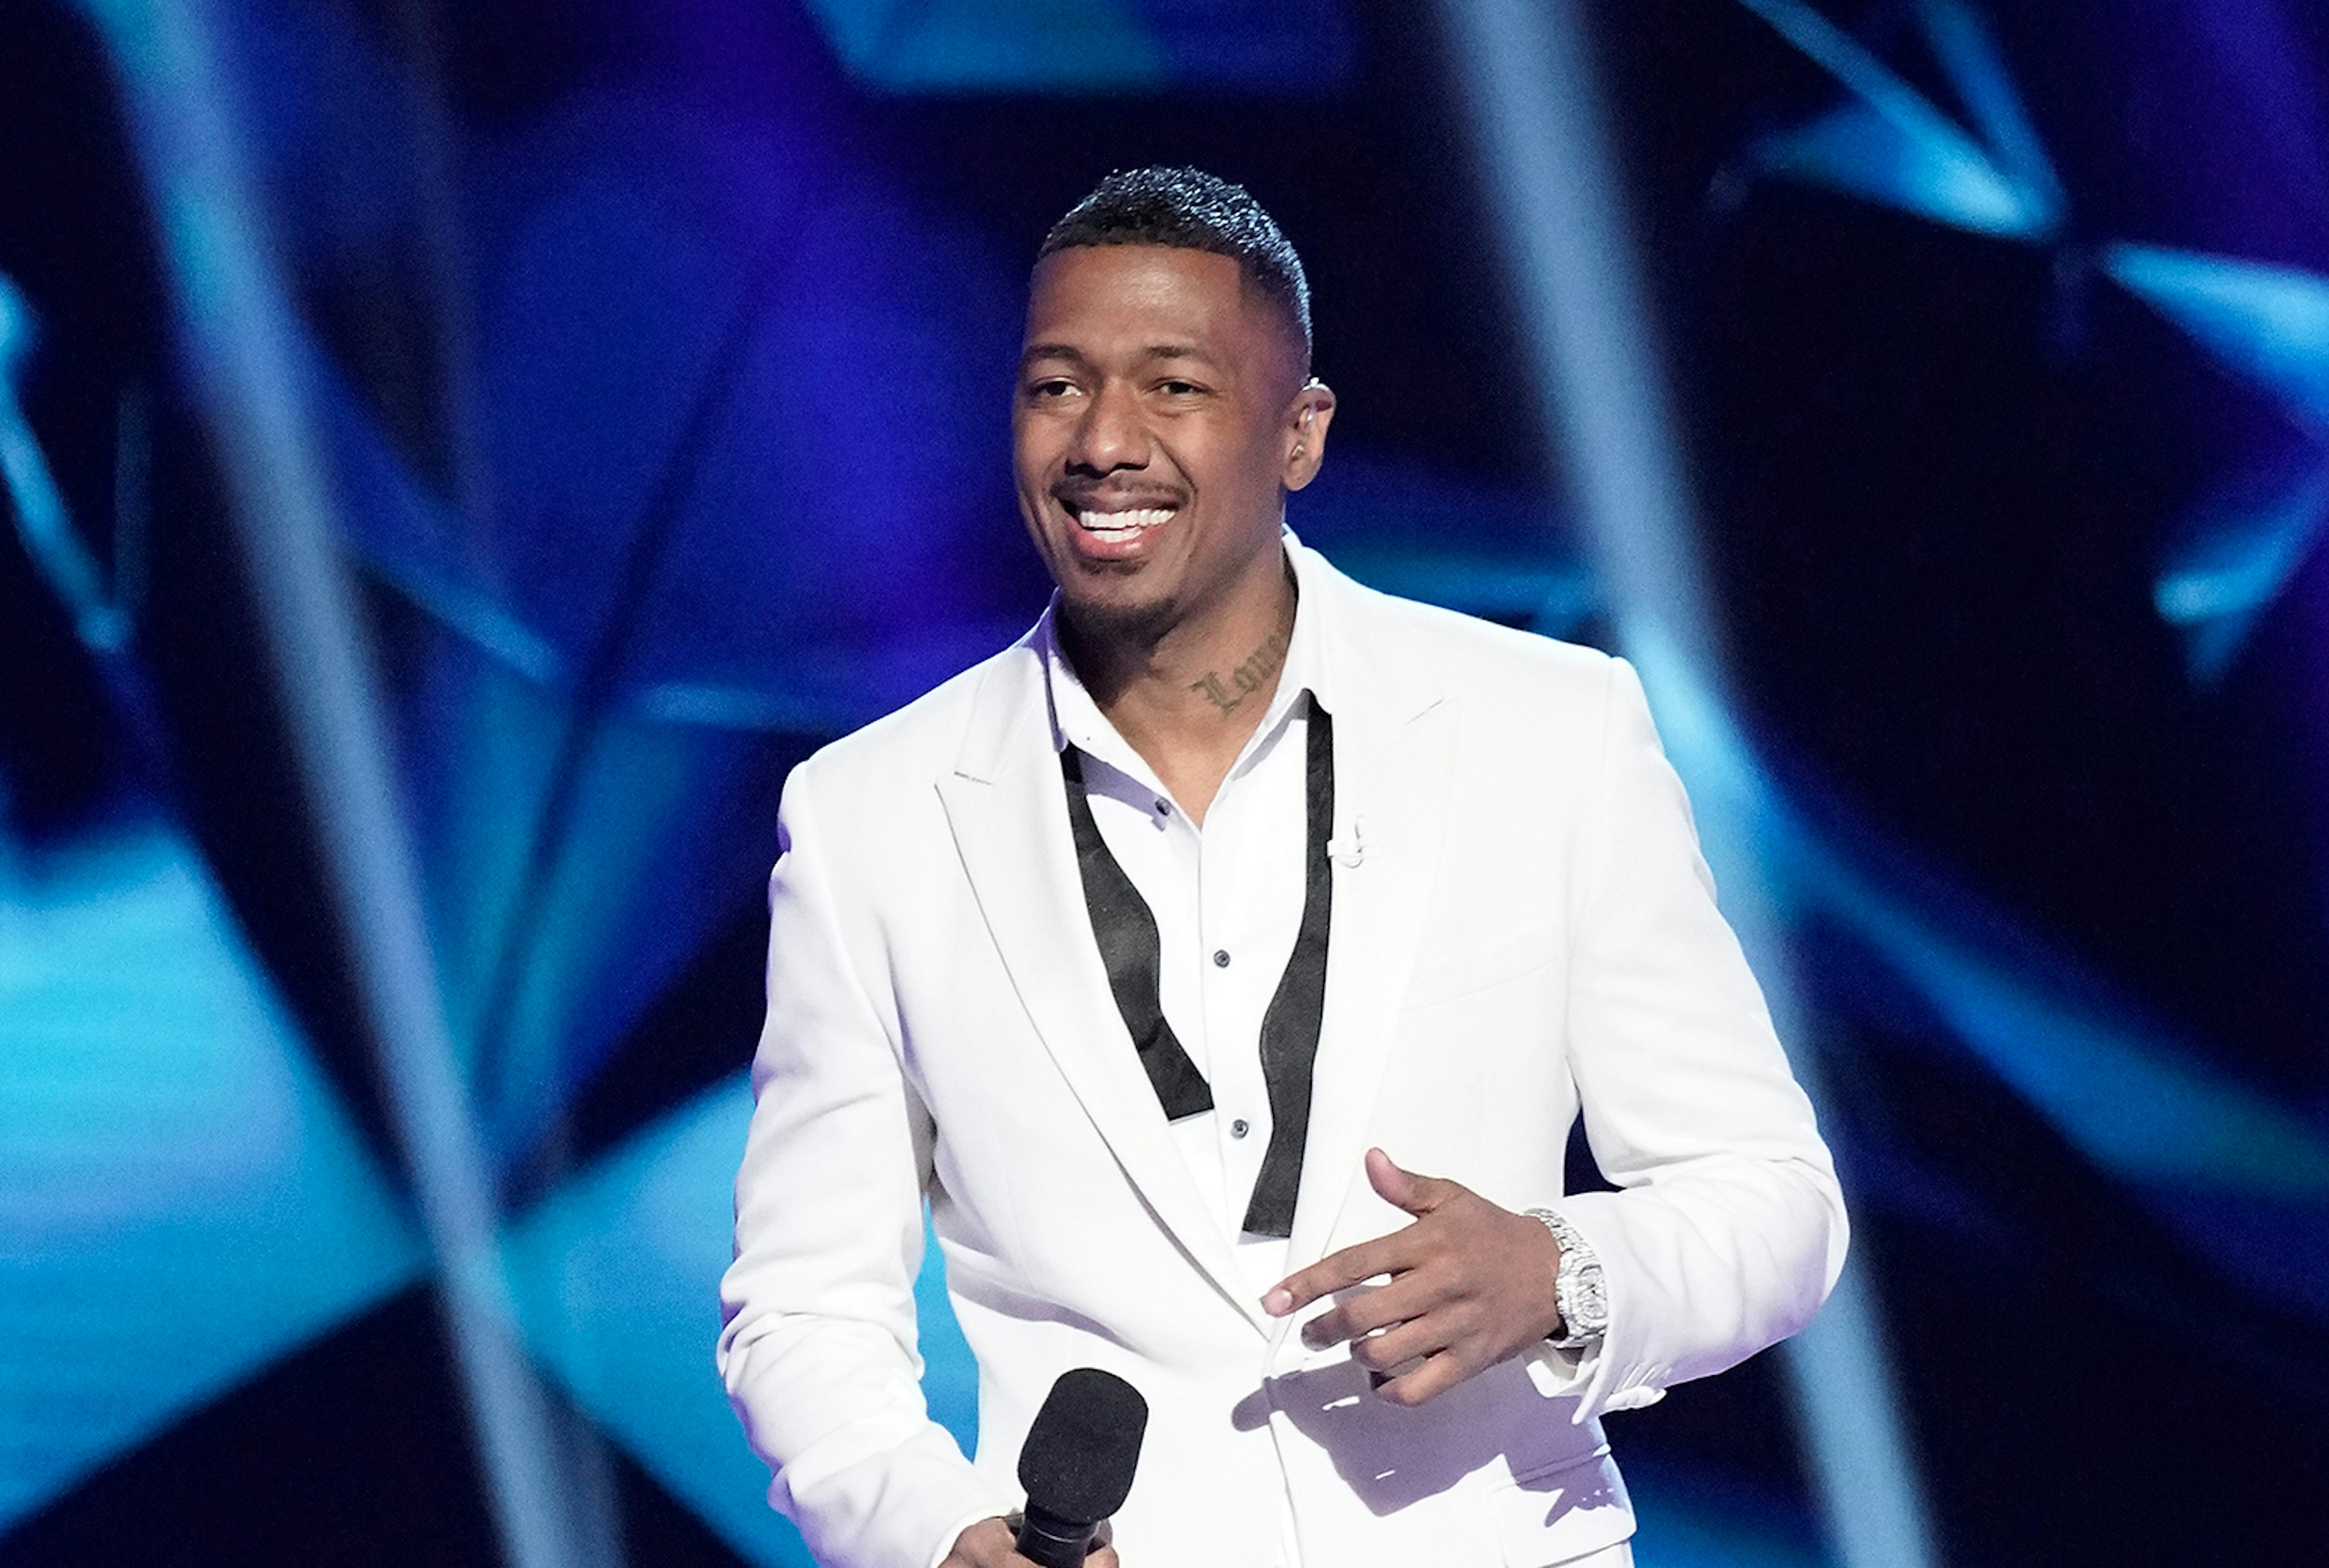 Host Nick Cannon in the Old Friends, New Clues: Group C Championships episode of THE MASKED SINGER airing Wednesday, March 25 (8:00-9:01 PM ET/PT) on FOX. (Photo by FOX via Getty Images)